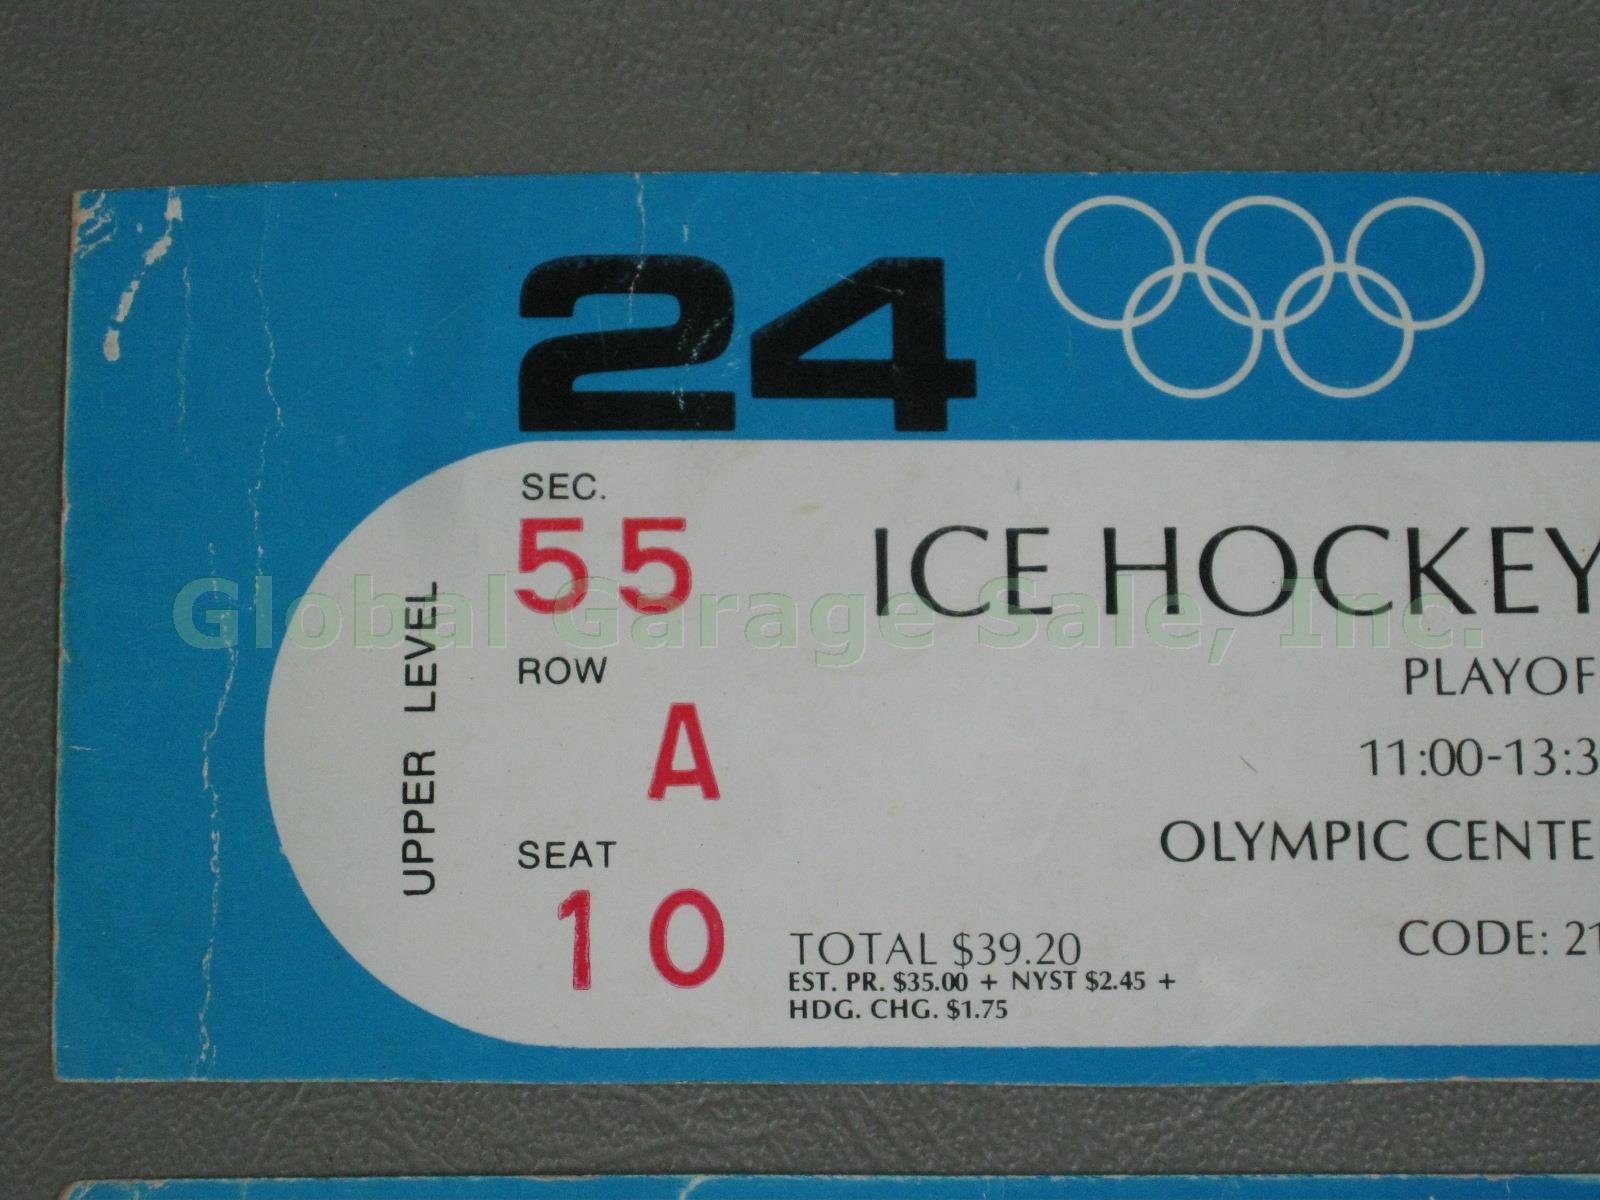 2 Original Tickets 1980 Lake Placid Olympic Games Gold Medal Ice Hockey Game NR! 3